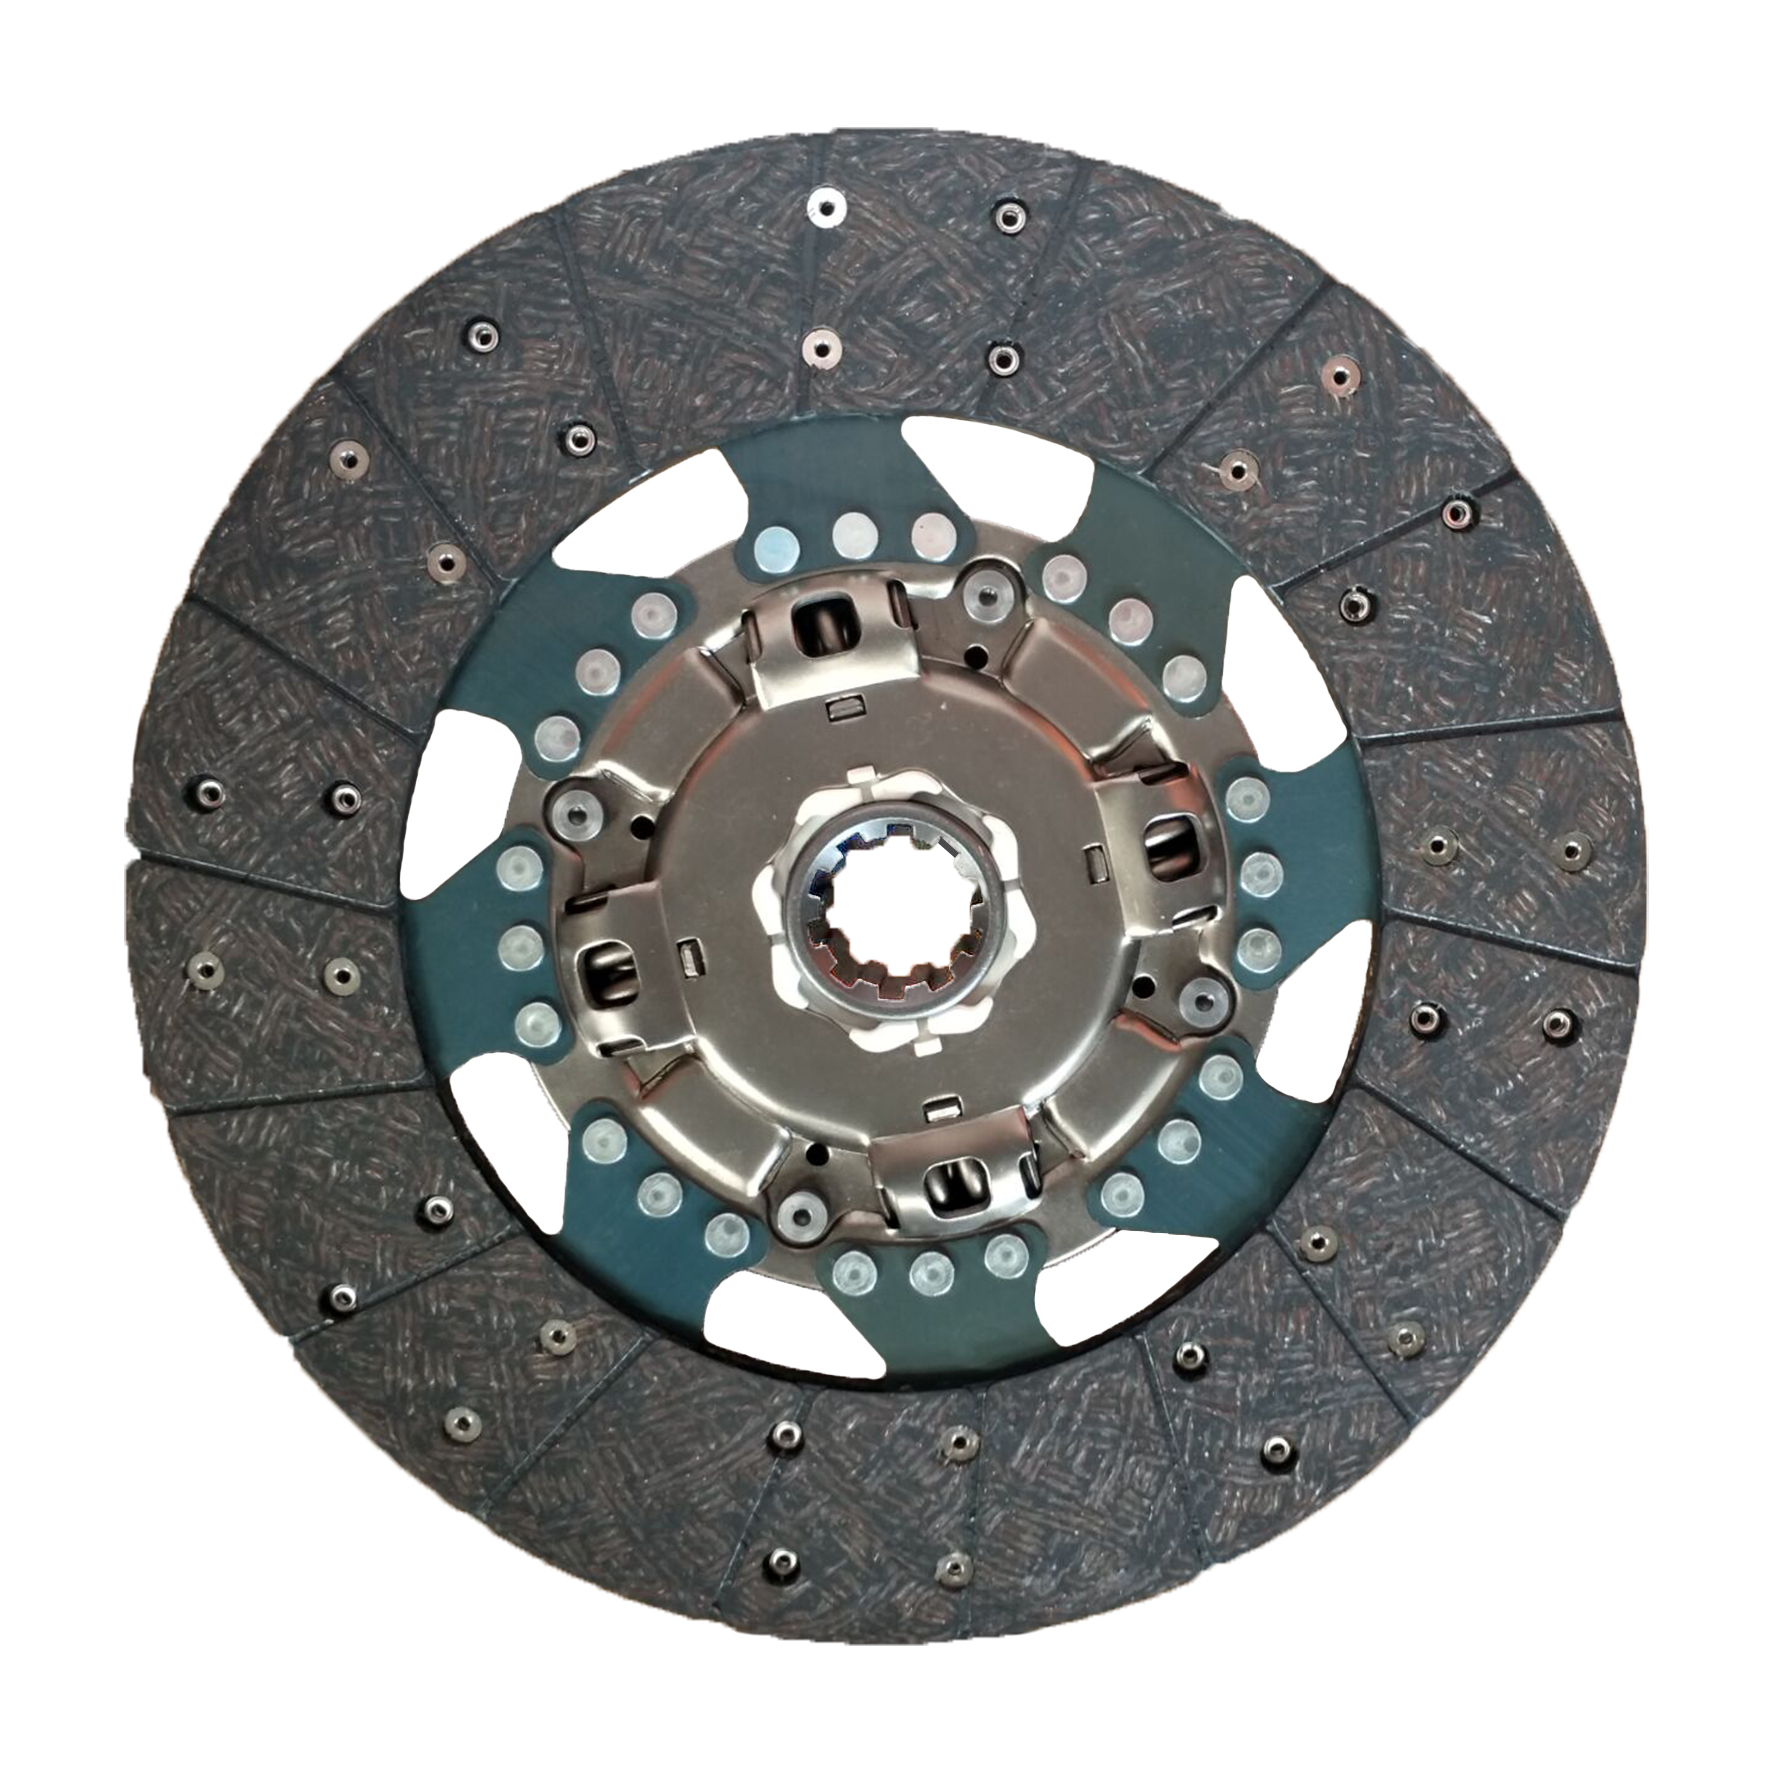 31250-2621 Wholesale Price truck Clutch assembly Clutch plate Clutch Disc For HINO